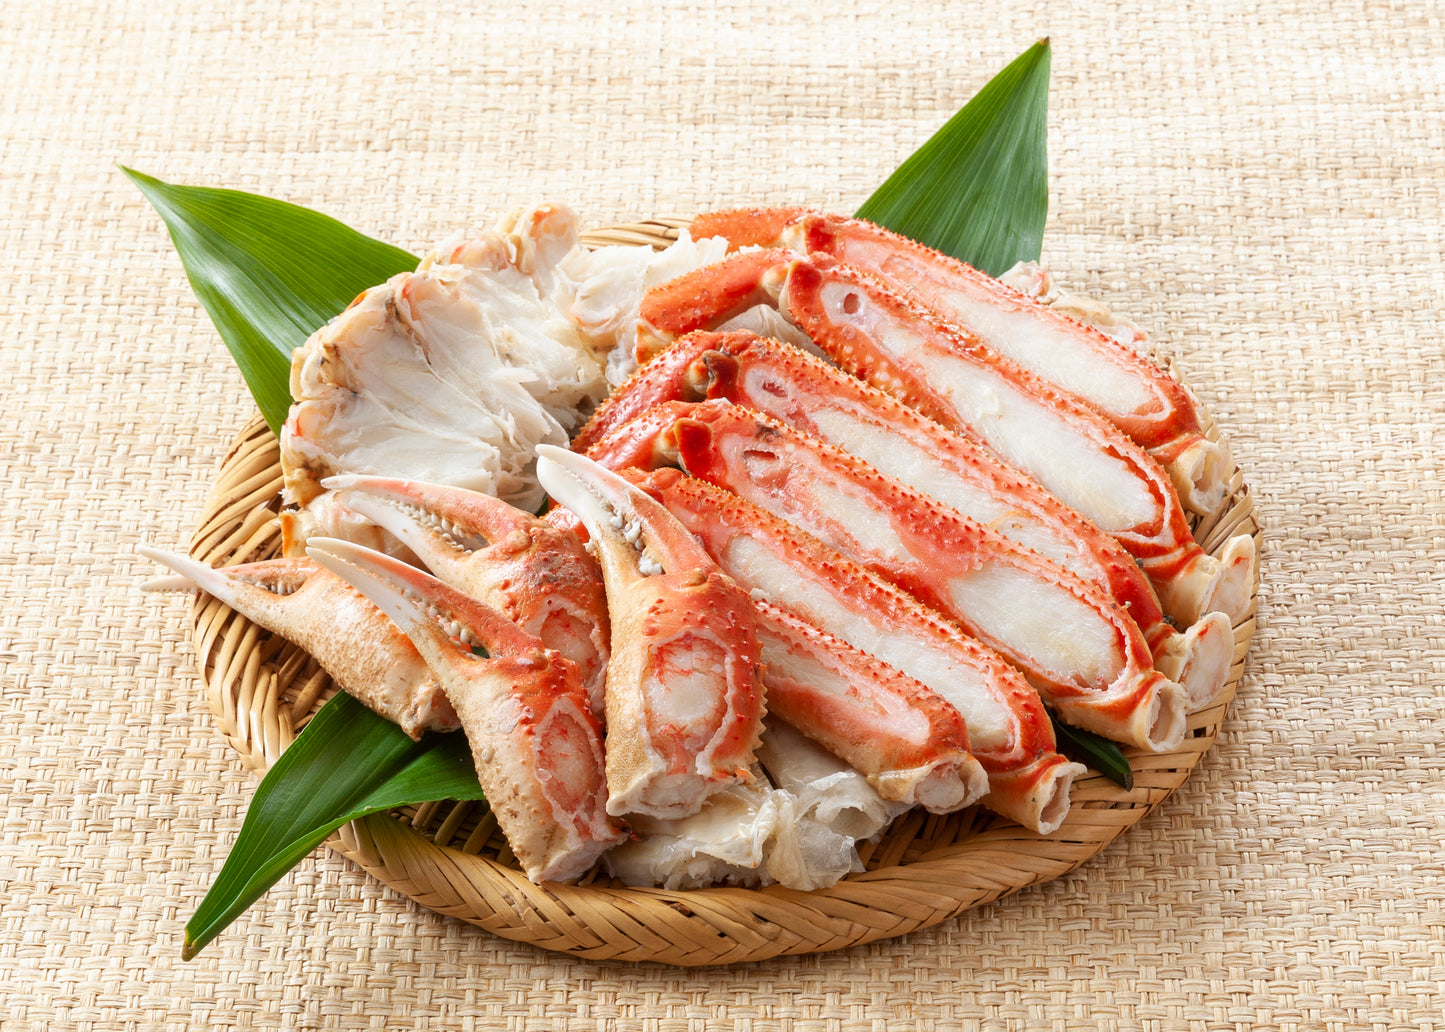 Extra large boiled red crab legs with shoulders 75-80 pieces (approx. 5kg)